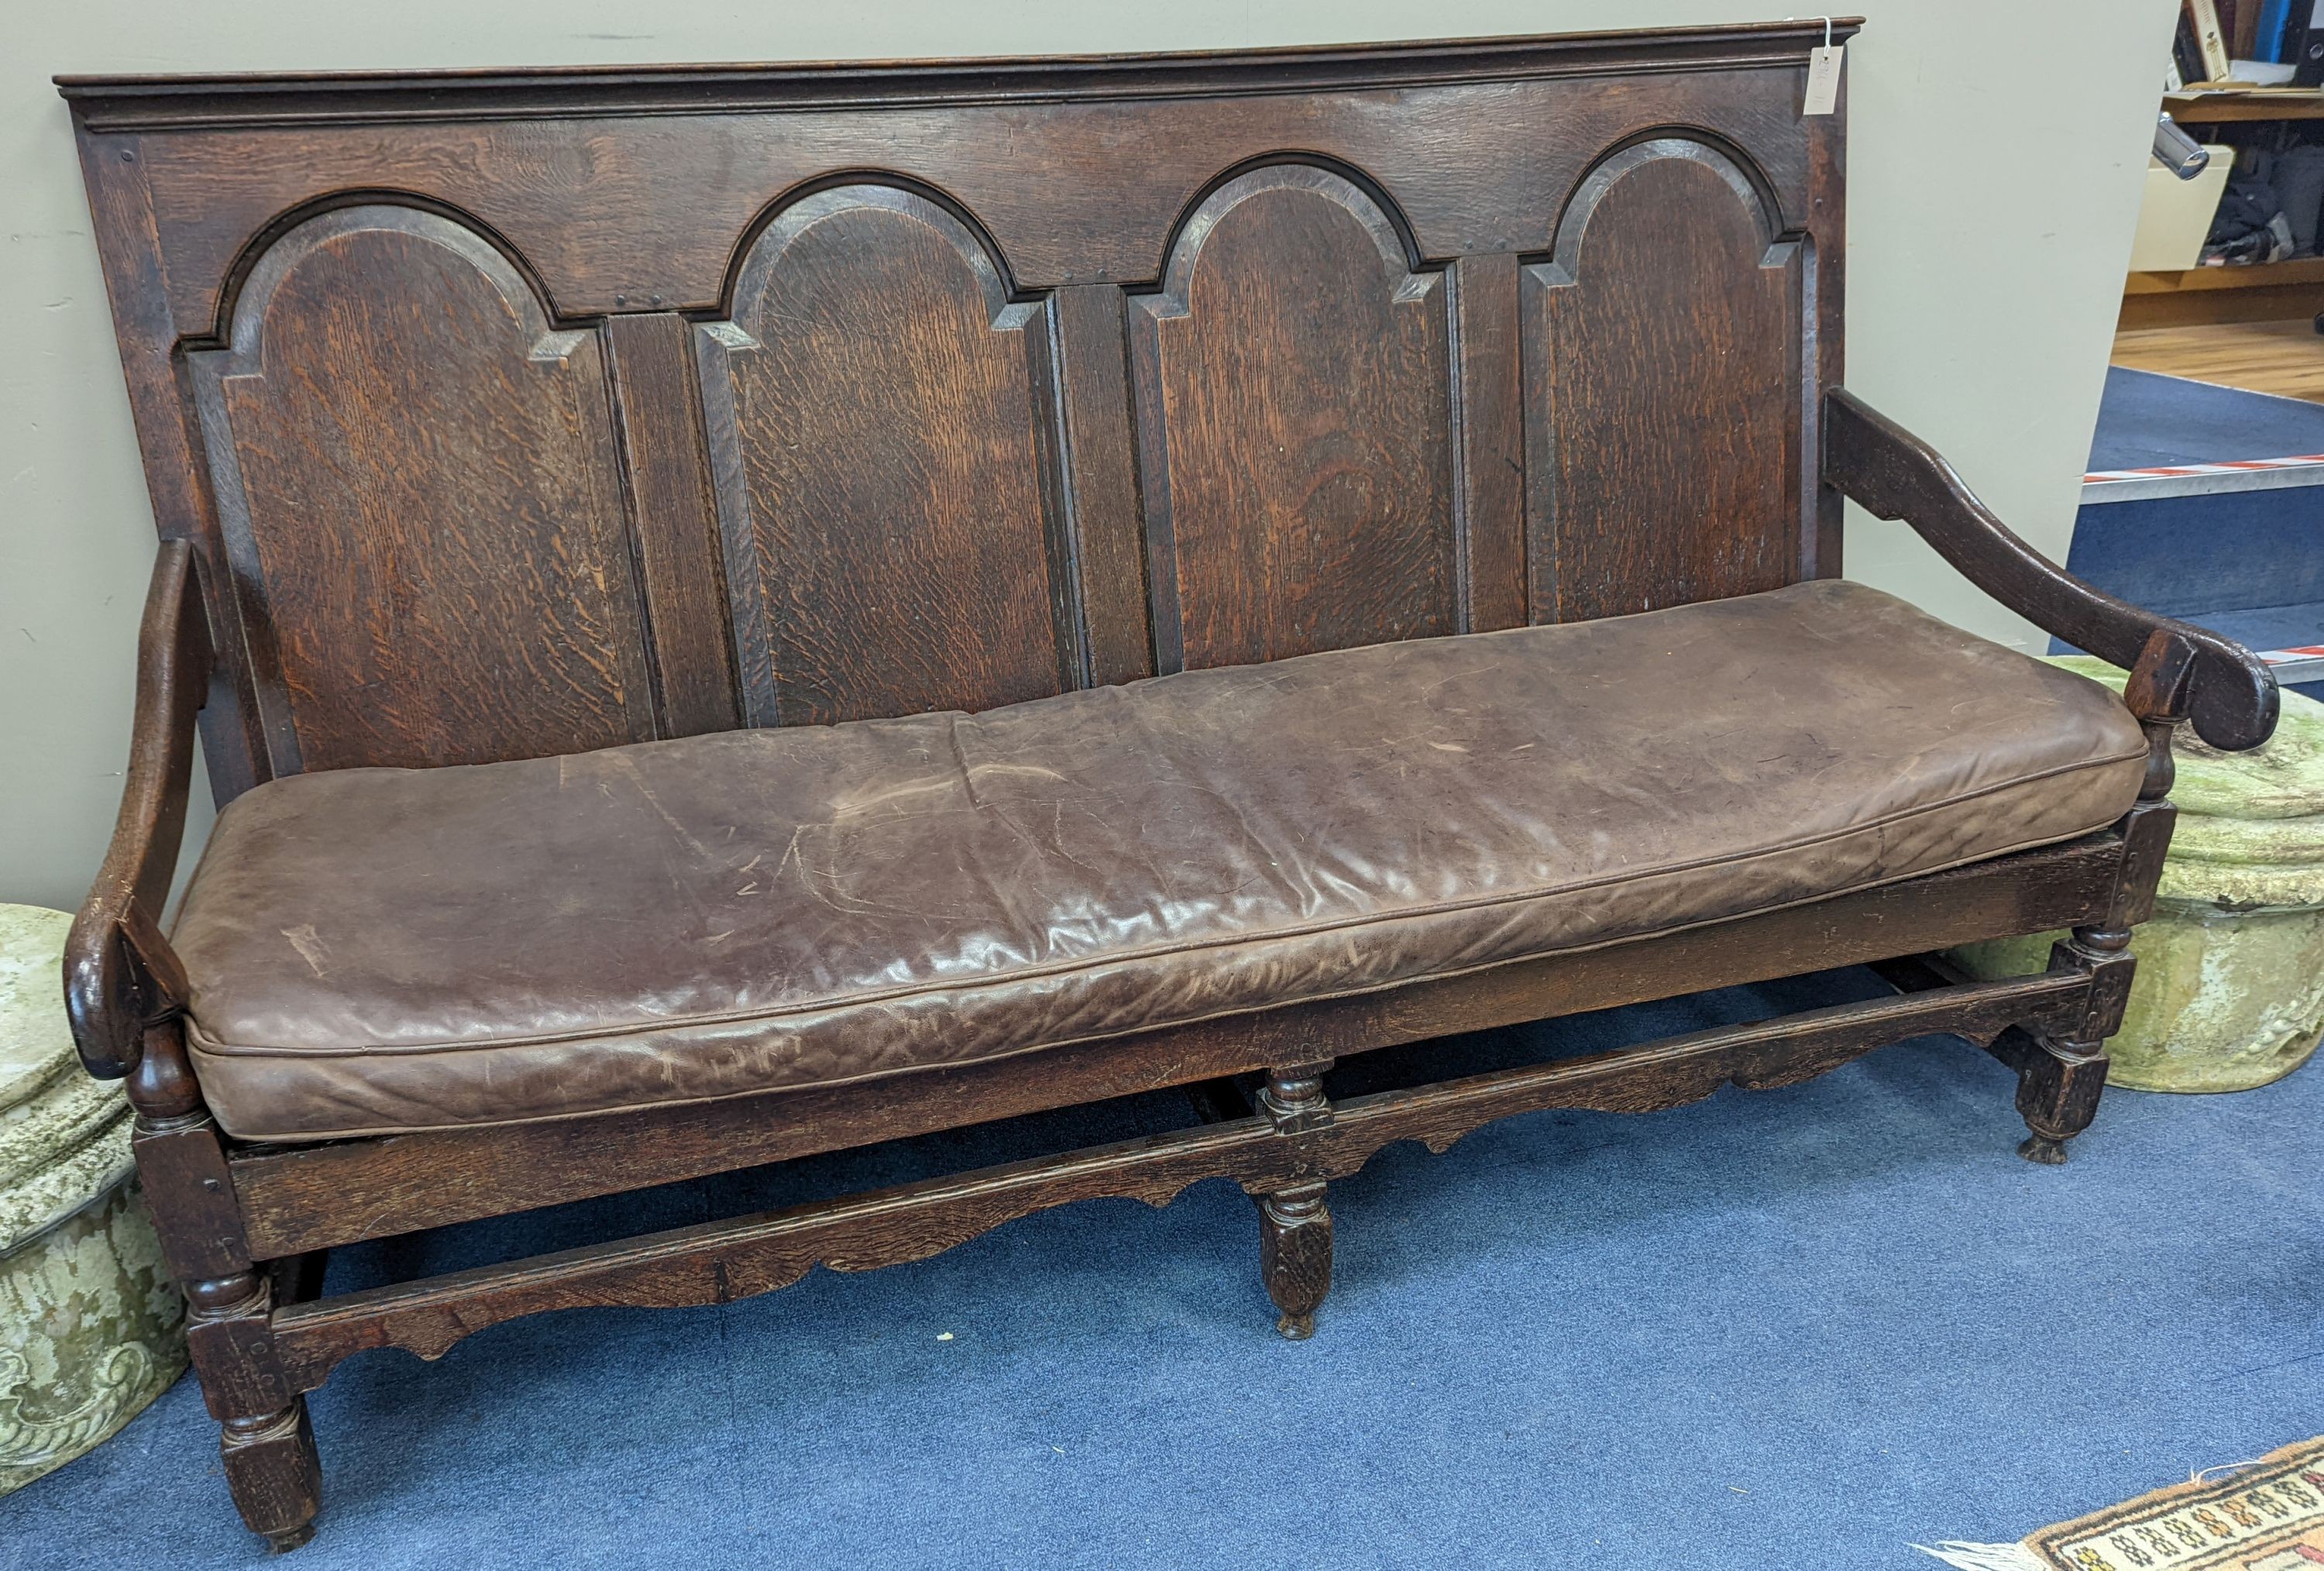 A mid 18th century panelled oak settle with leather squab seat, length 185cm, depth 77cm, height 114cm